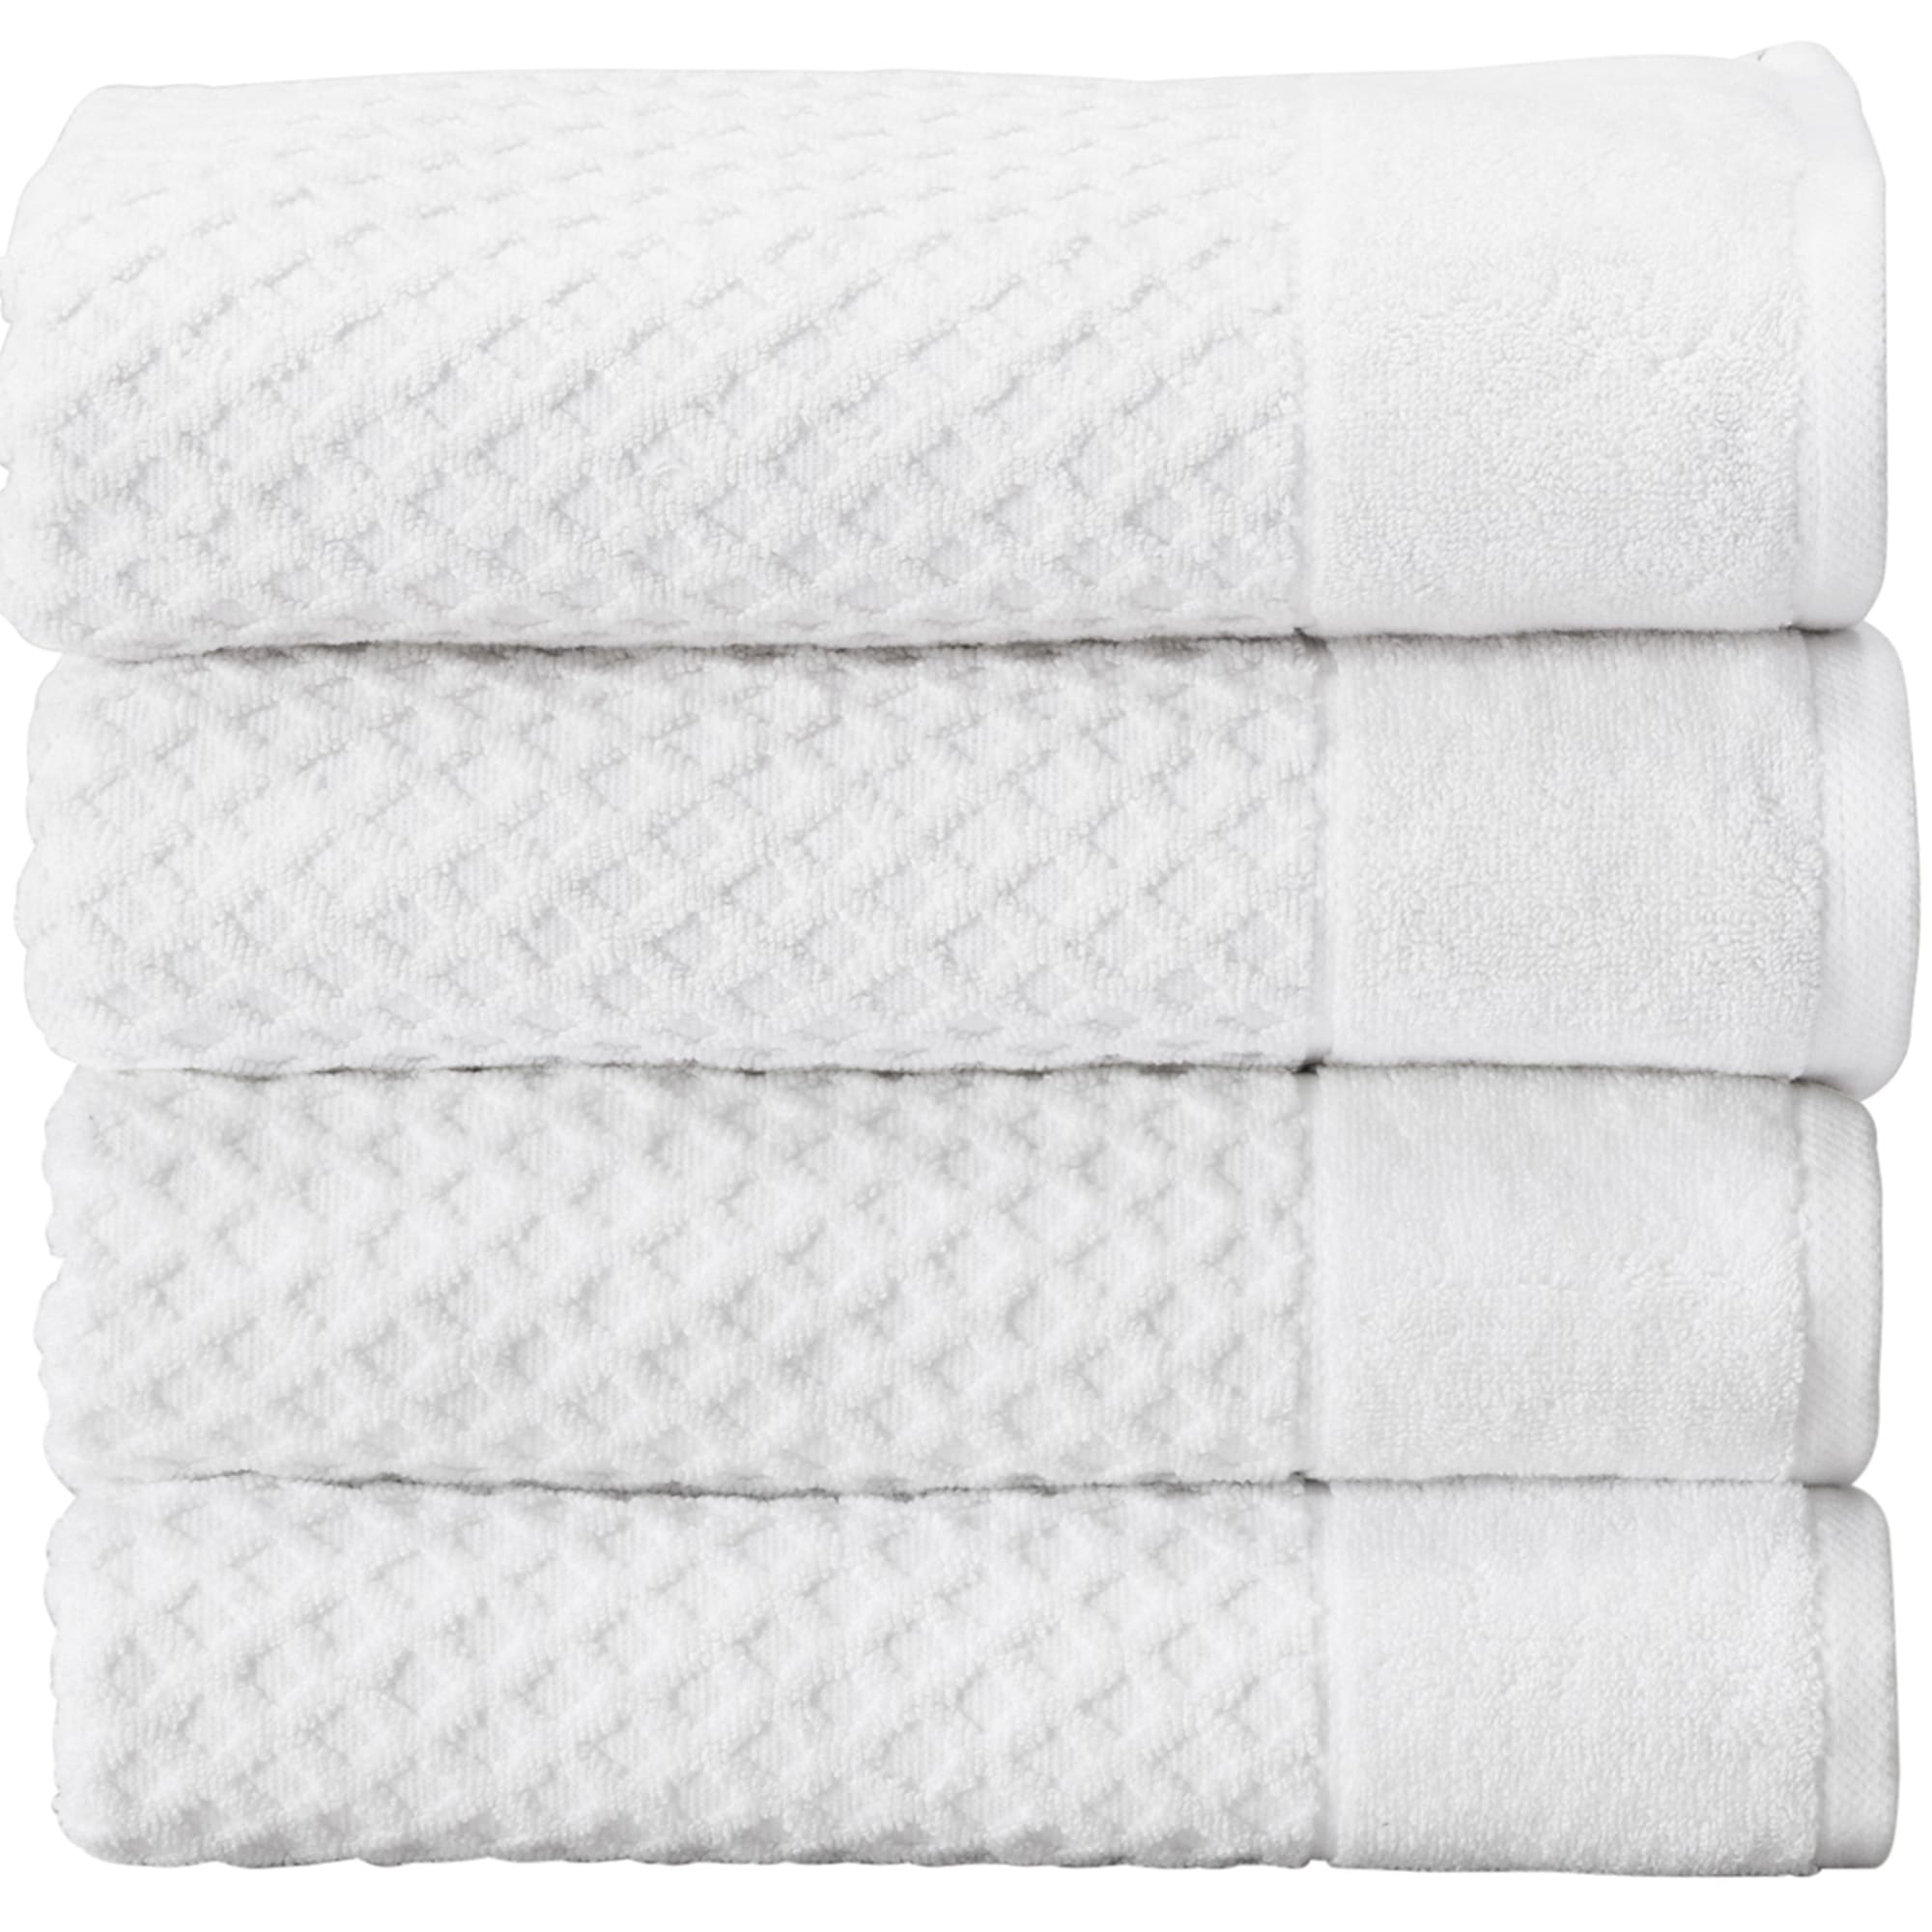 https://ak1.ostkcdn.com/images/products/is/images/direct/8aea09e5f632e0361a964c8ed7e93c6fabf25714/Great-Bay-Home-Cotton-Diamond-Textured-Towel-Set.jpg